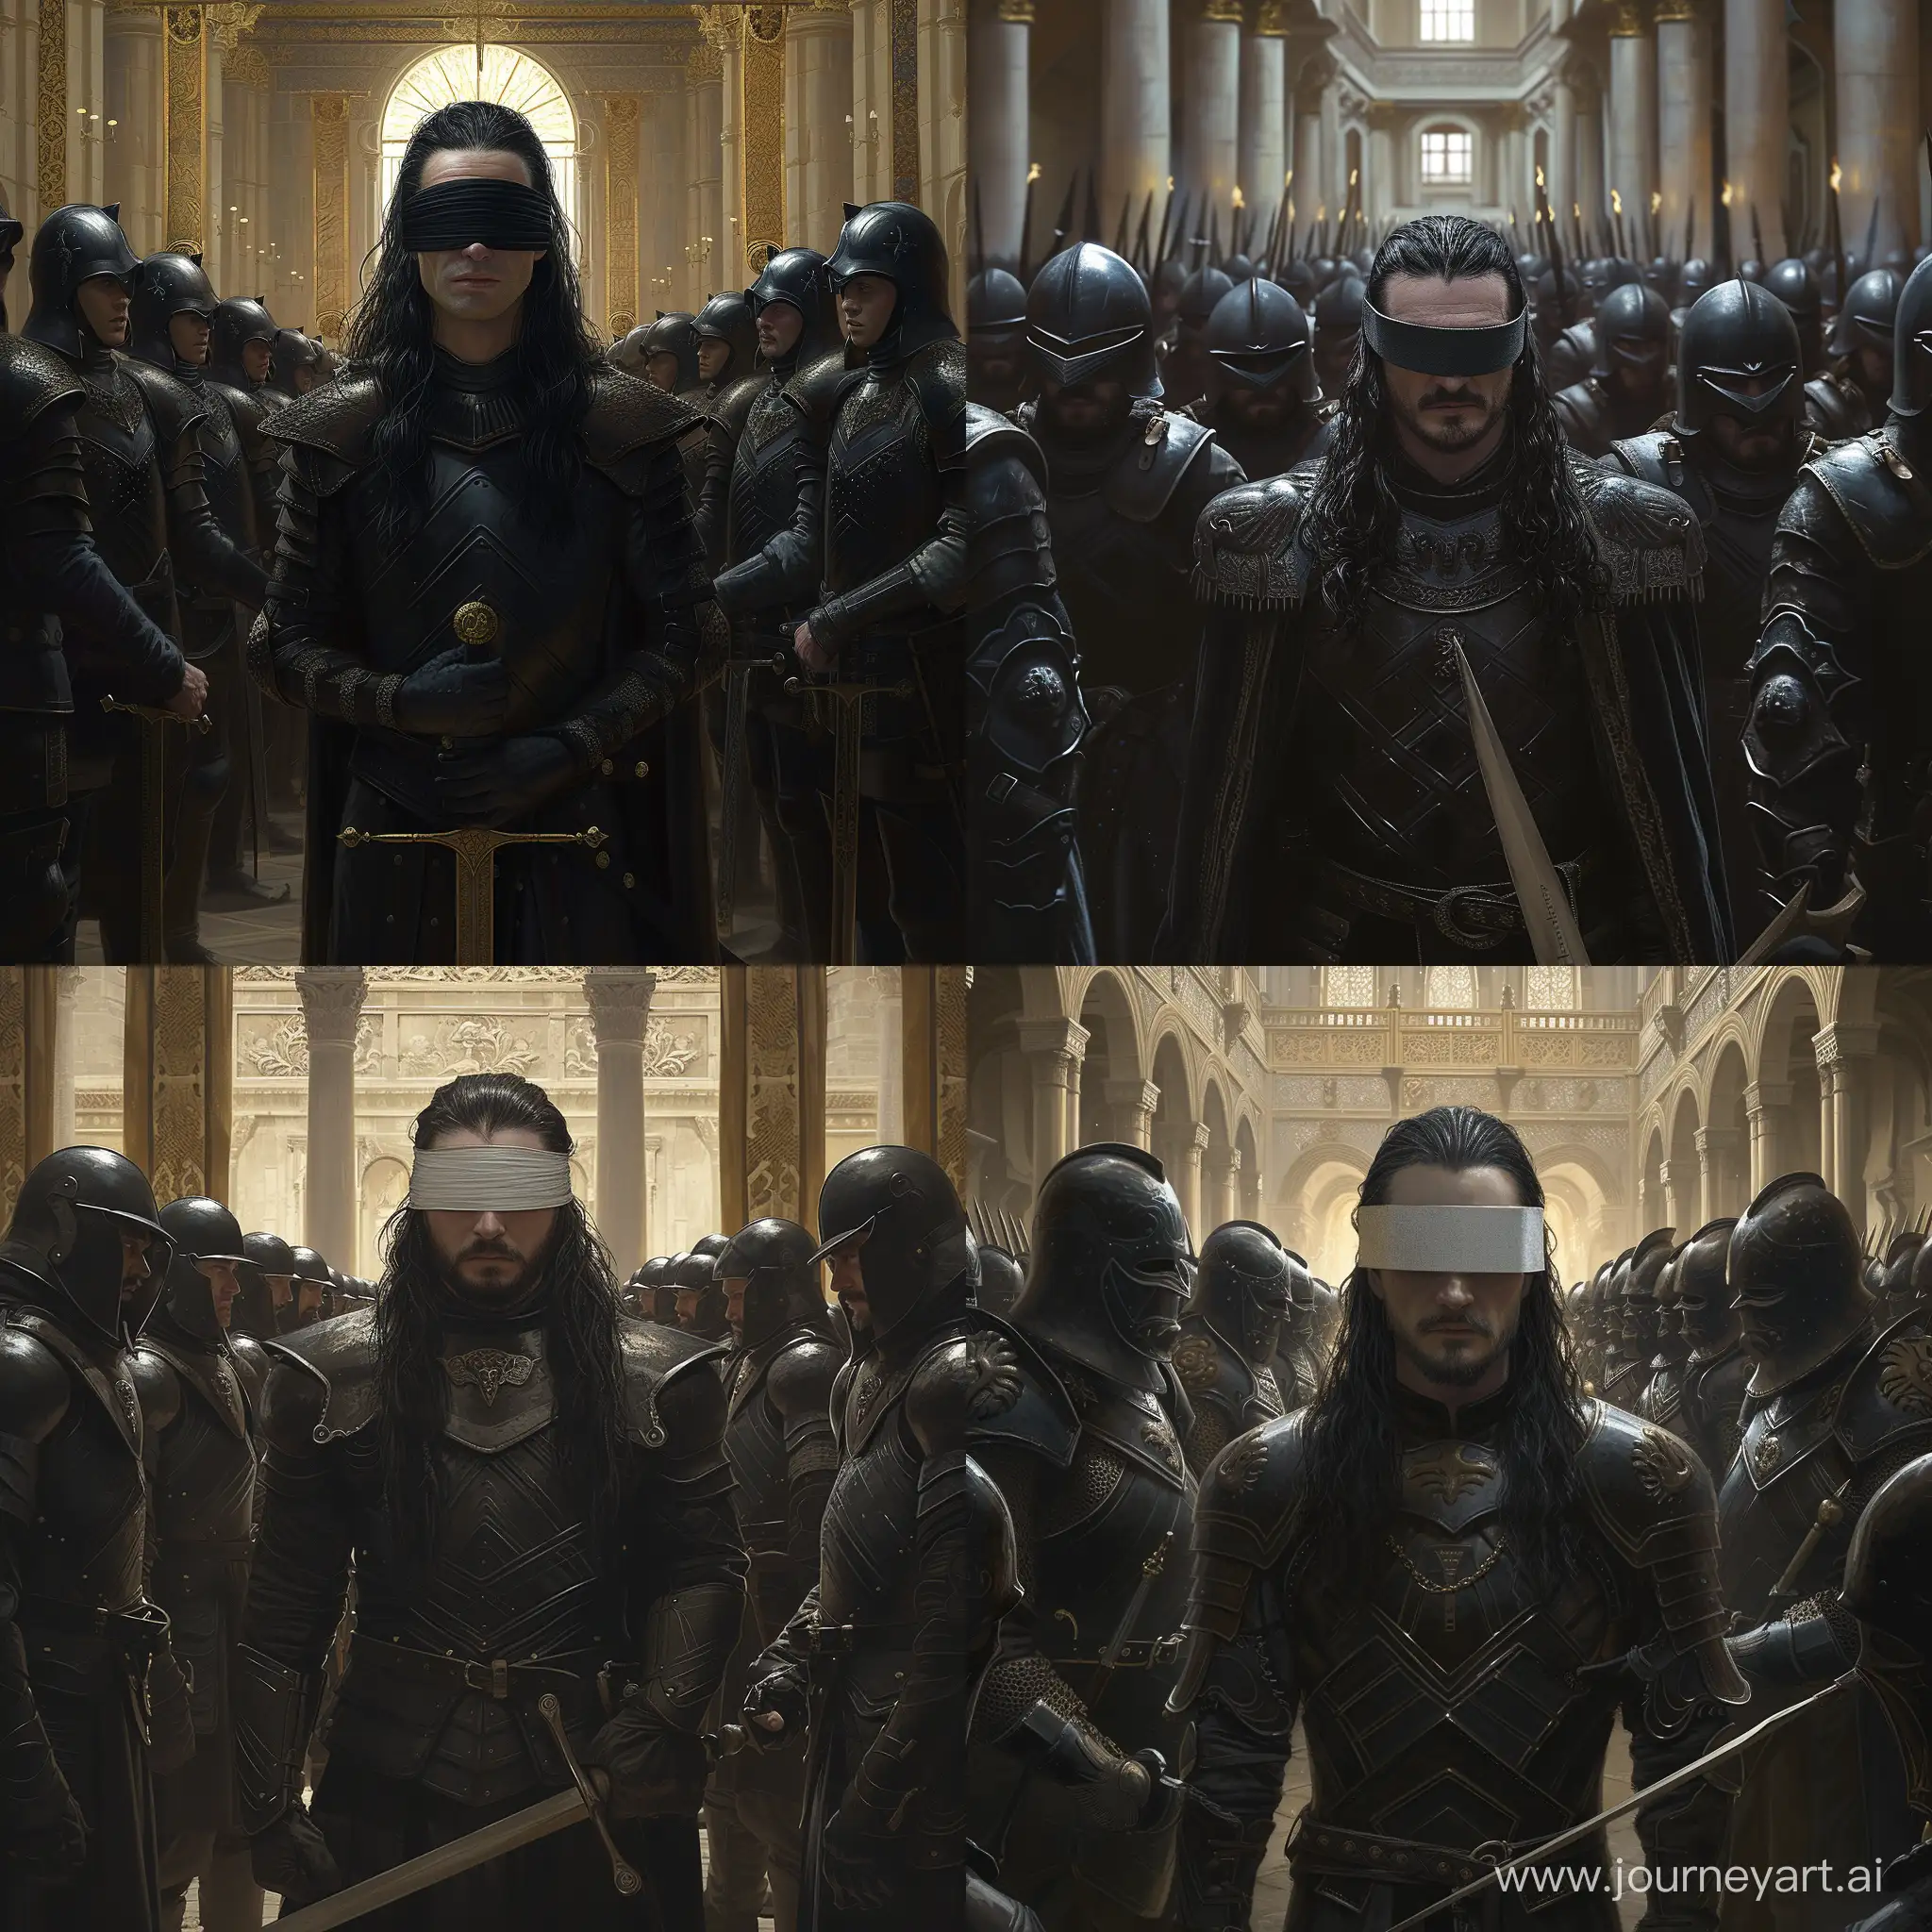 Euron-Greyjoy-Blindfolded-Lord-with-Valyrian-Sword-Surrounded-by-Guards-in-Castle-Hall